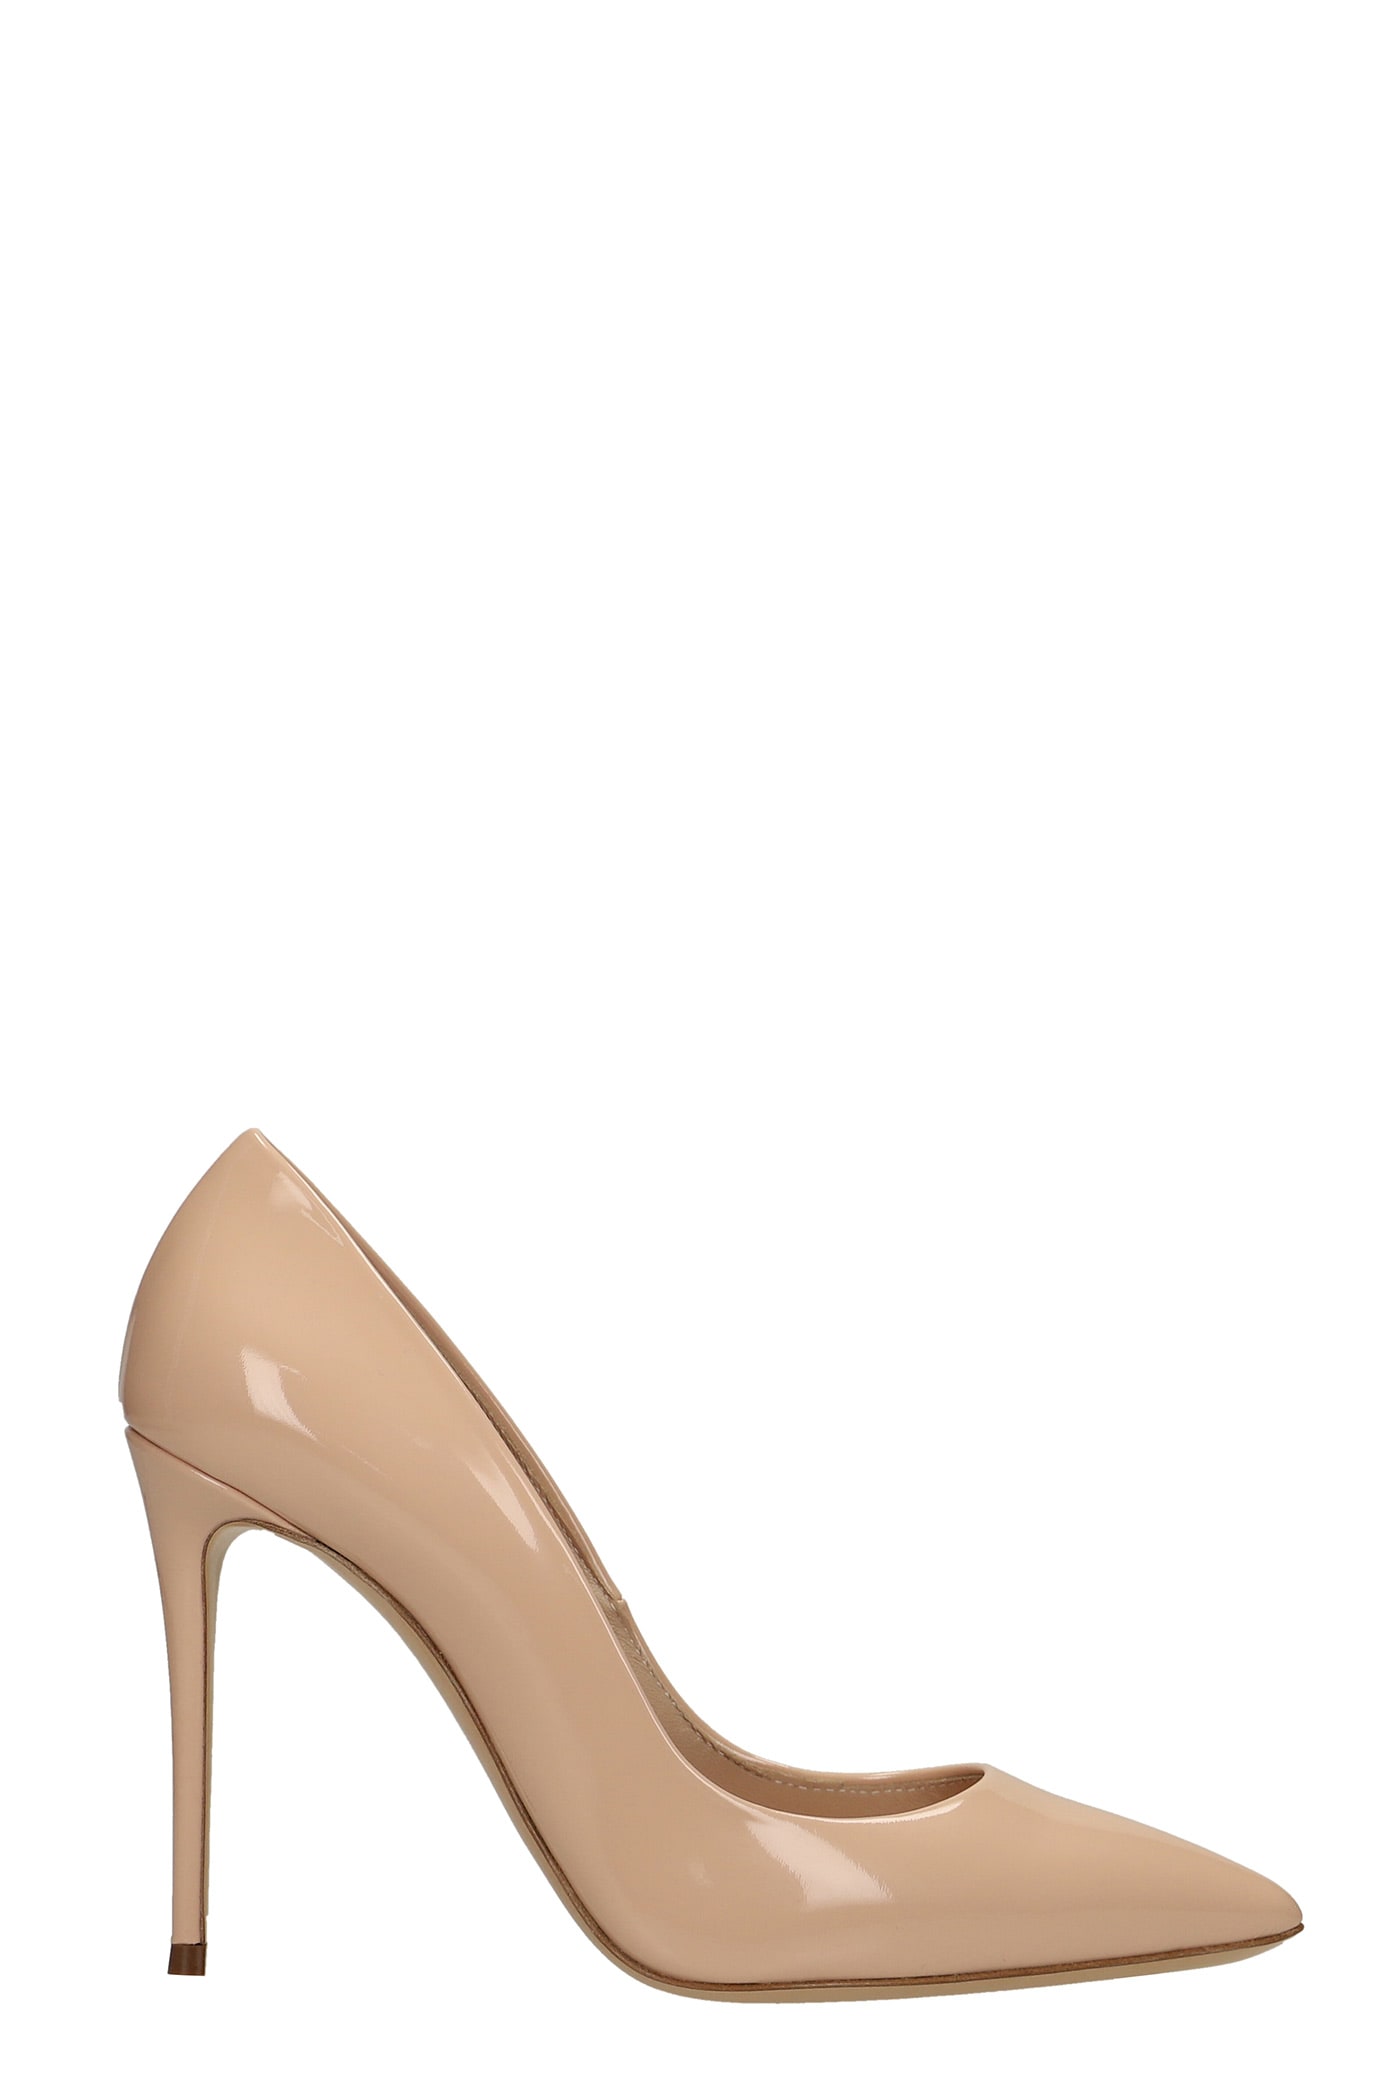 Casadei Pumps In Powder Patent Leather